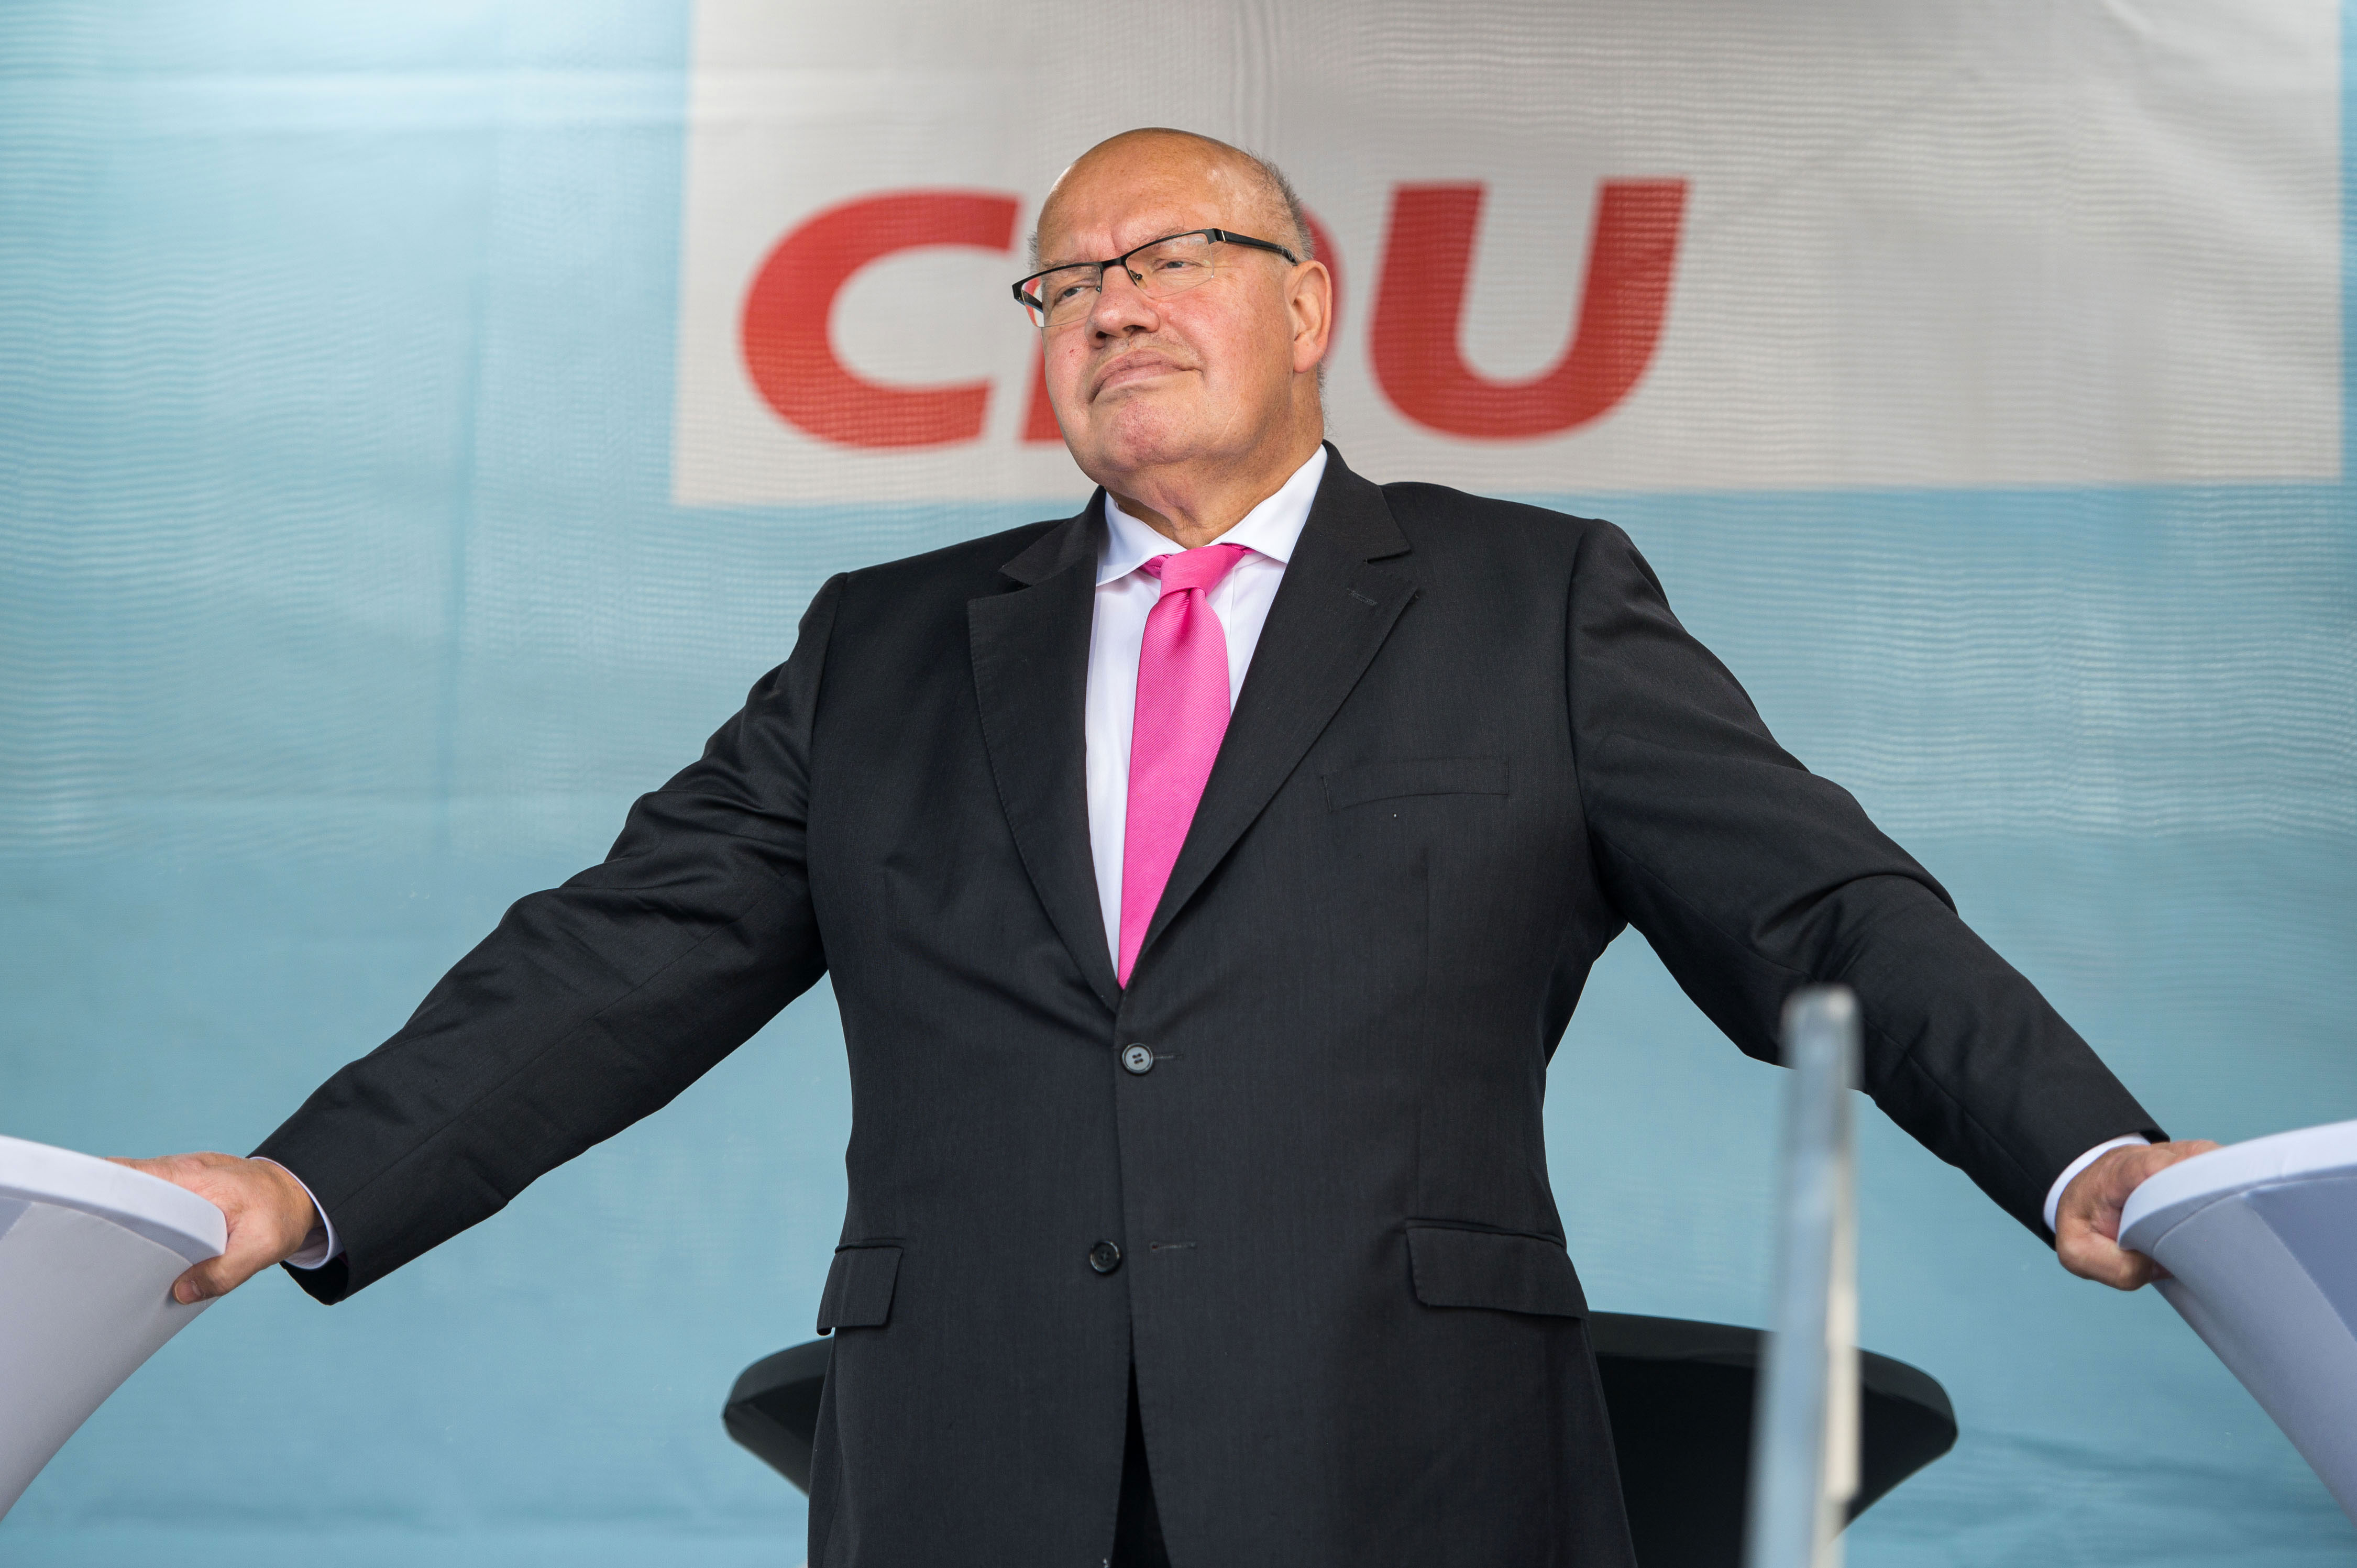 Peter Altmaier, the Federal Minister of Economic Affairs and Energy, attends a Christian Democratic Union (CDU) election campaign event in St. Wendel, Germany, on September 22.